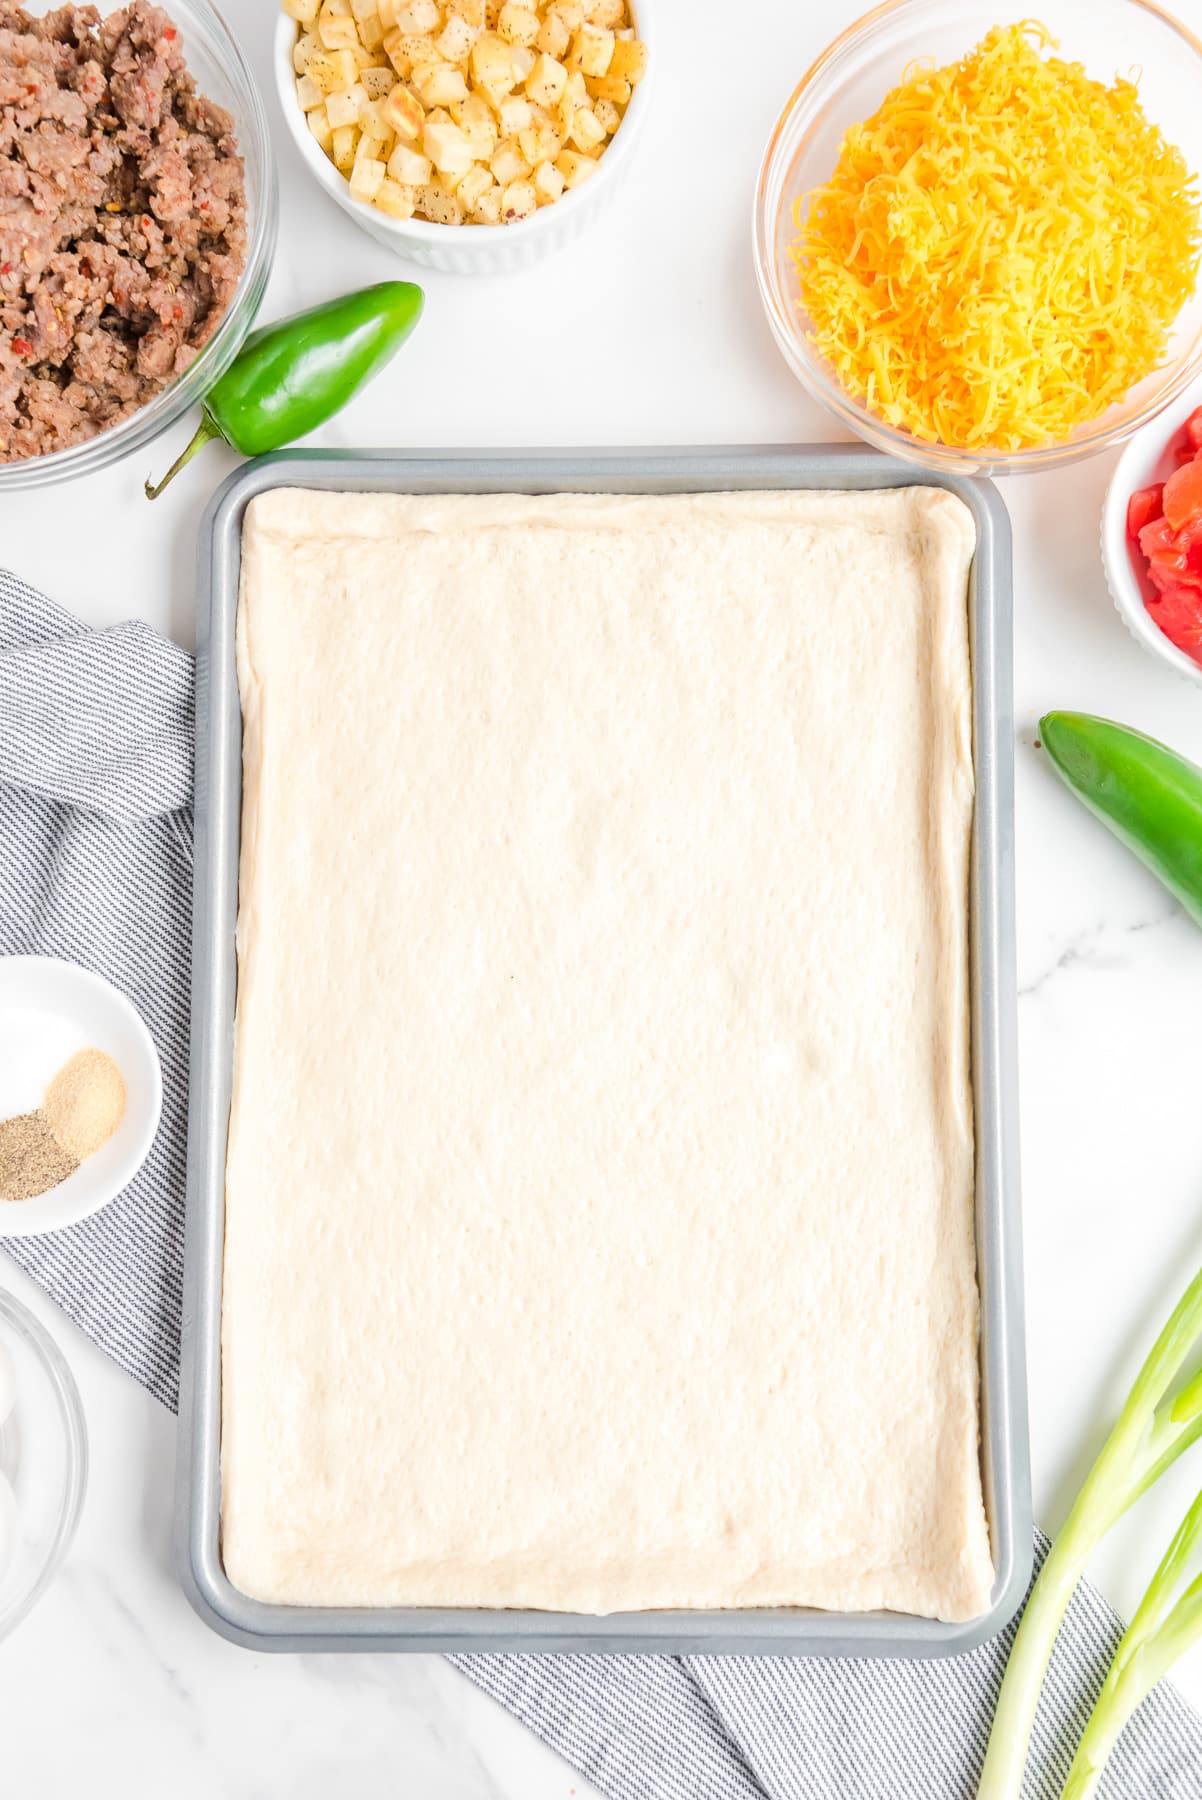 Pizza dough stretched over a baking sheet to make a rectangular pizza from above with bowls of other pizza ingredients nearby.